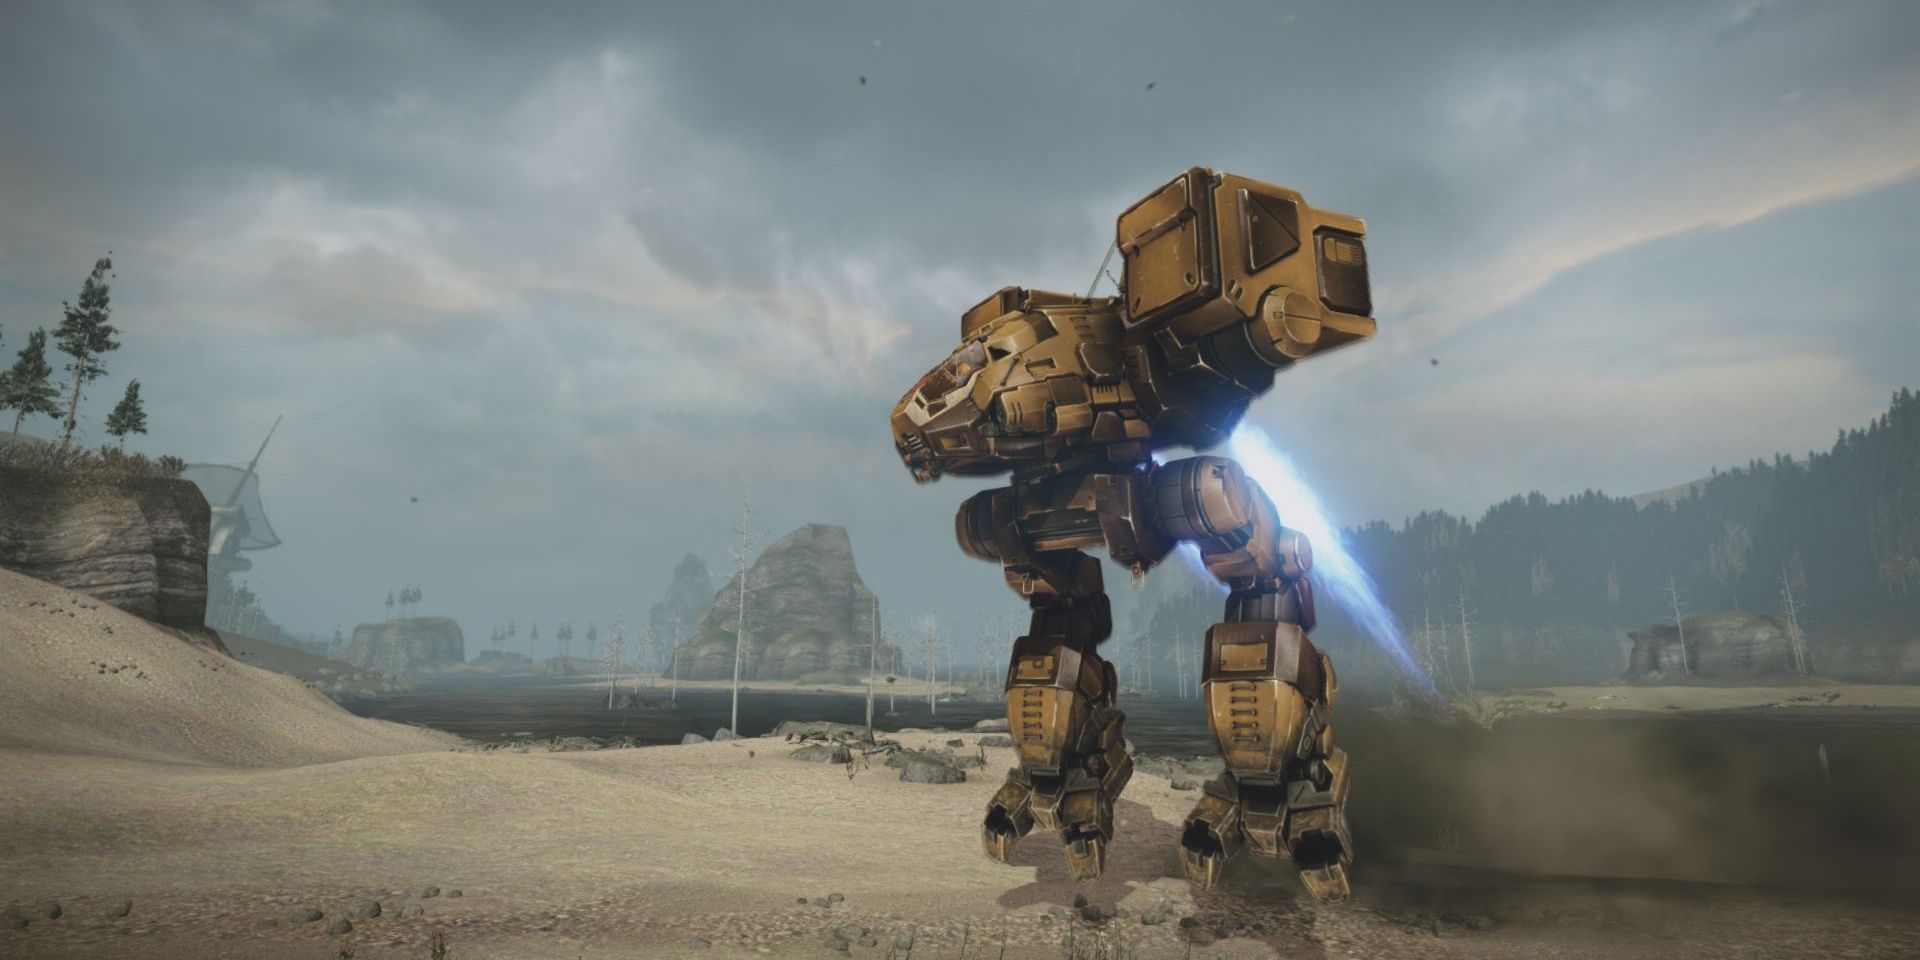 Jump jets can carry mechs much further in MechWarrior 5